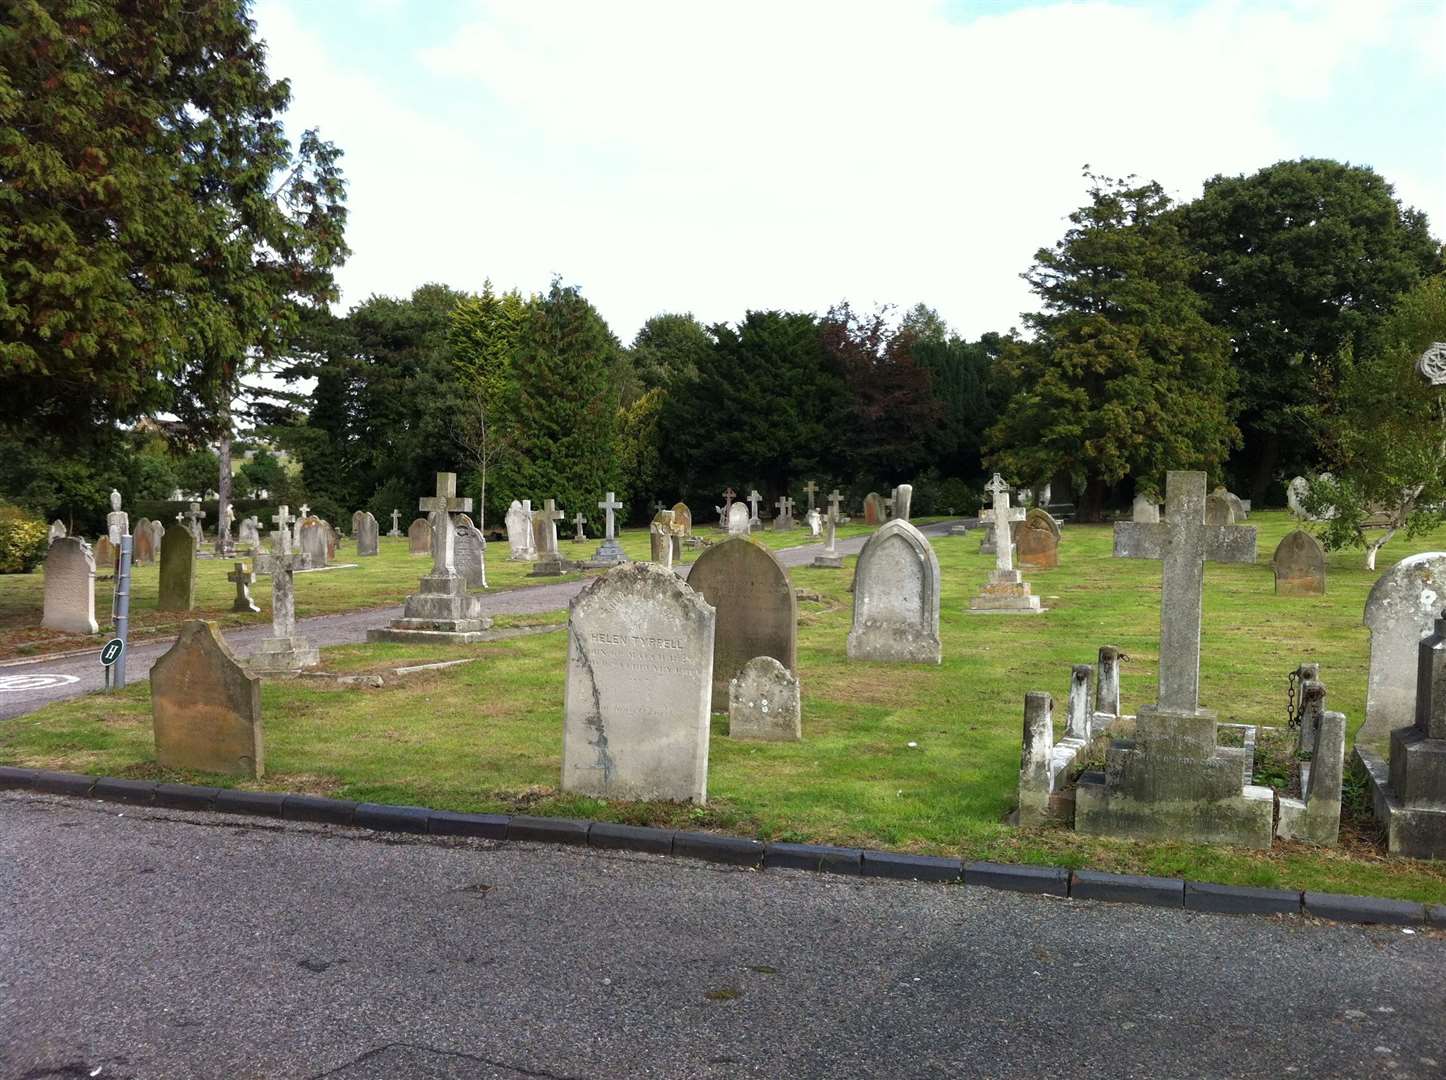 Lynda Martin was walking her dog in Herne Bay Cemetery, which is run by Canterbury City Council